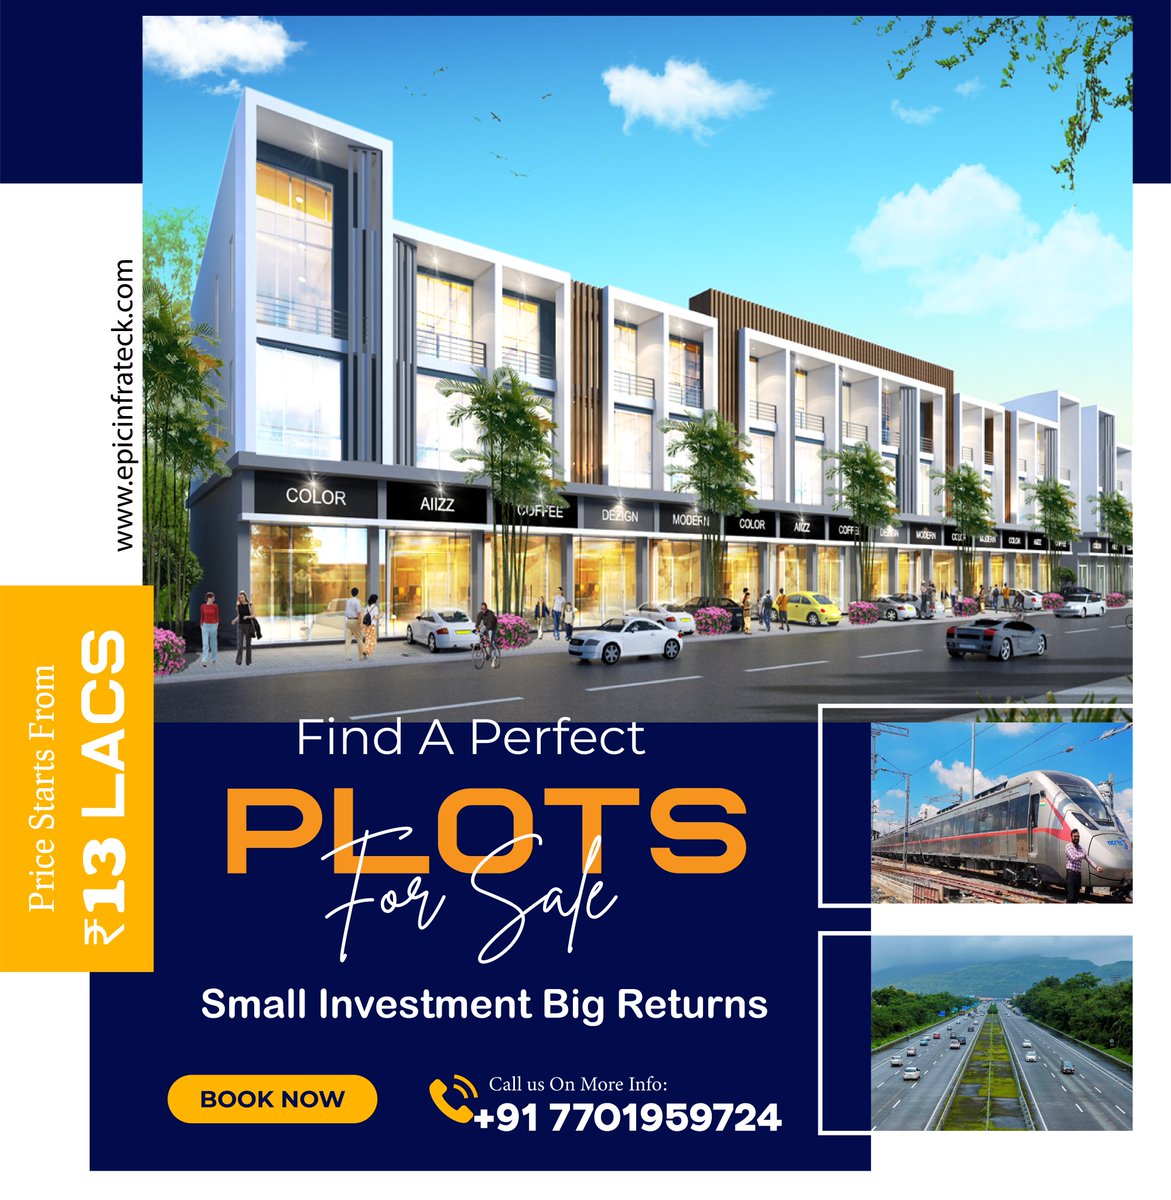 🌟 Invest in the prestigious luxury township by Epic Infrateck in Behror, on the Delhi-Jaipur highway.
🏡 Residential and commercial plots starting from just Rs 13 lakhs.
💰 Guaranteed return on investment of up to 30%.

#EpicInfrateck #LuxuryTownship #Investment #sharemarket